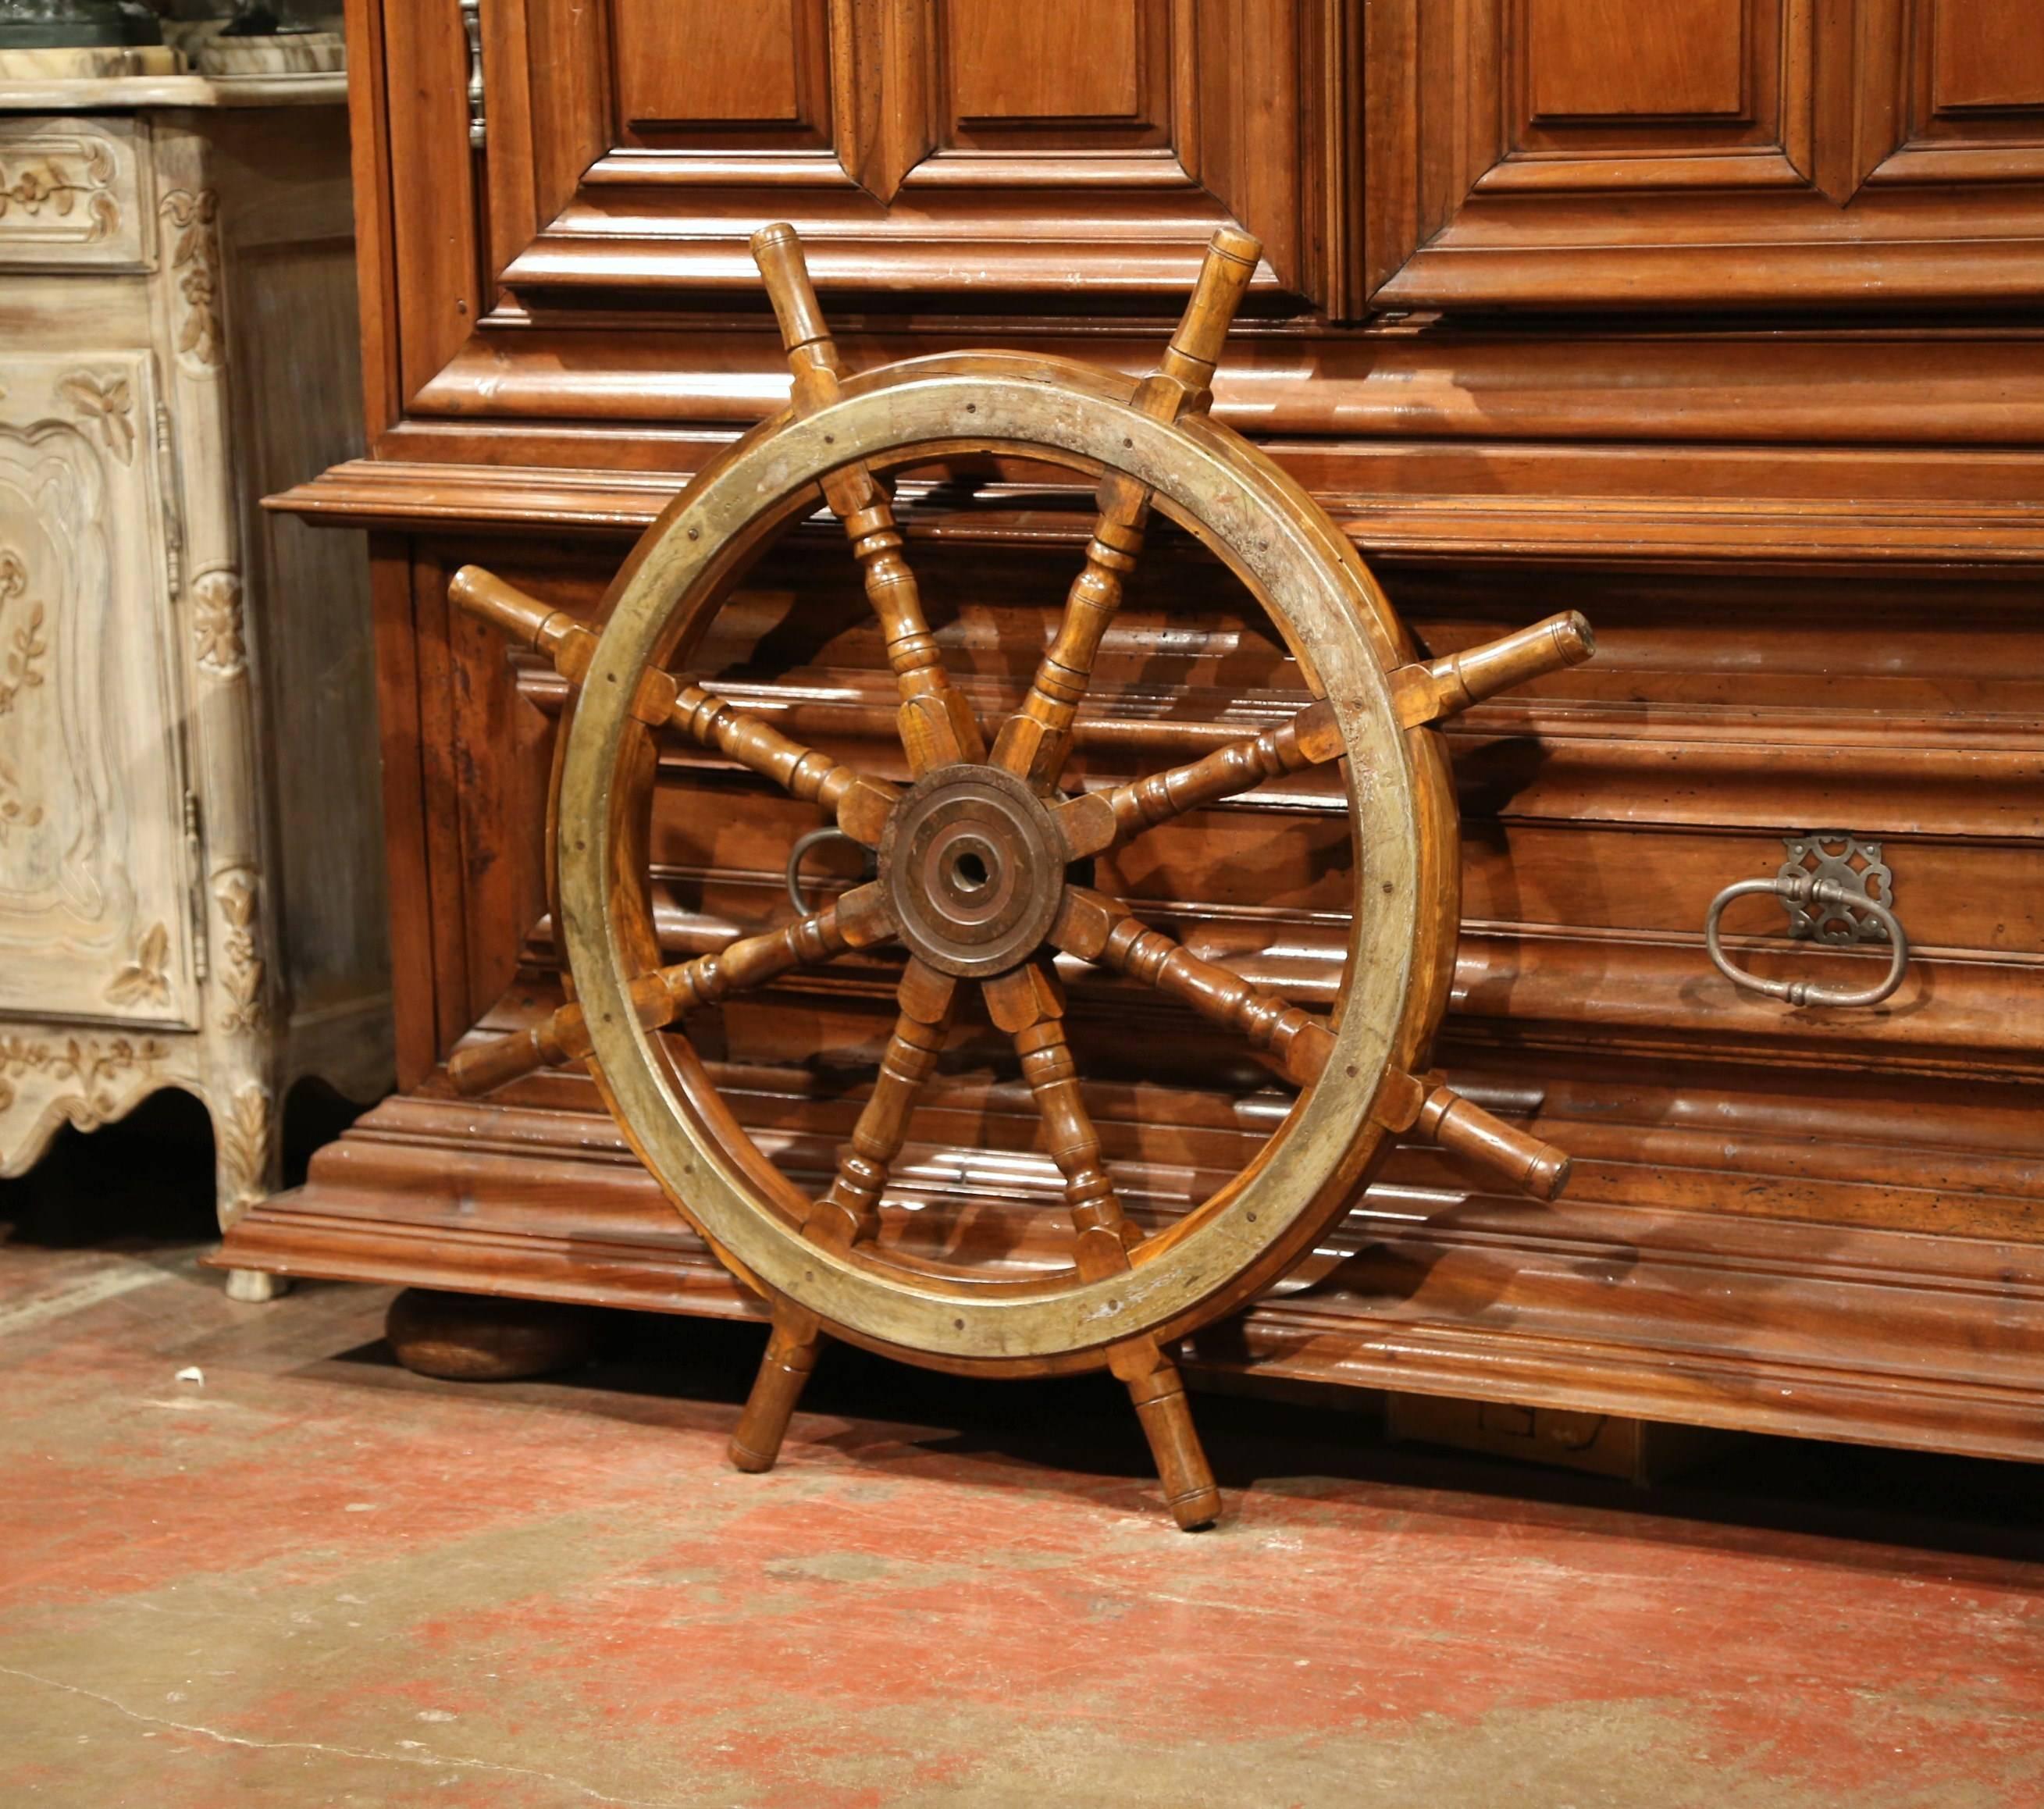 This antique wooden ship wheel was carved in France, circa 1880. The traditional, fruit wood nautical object has its original metal brace, eight turned handles and is in excellent condition with original walnut patina. This classic wheel would make